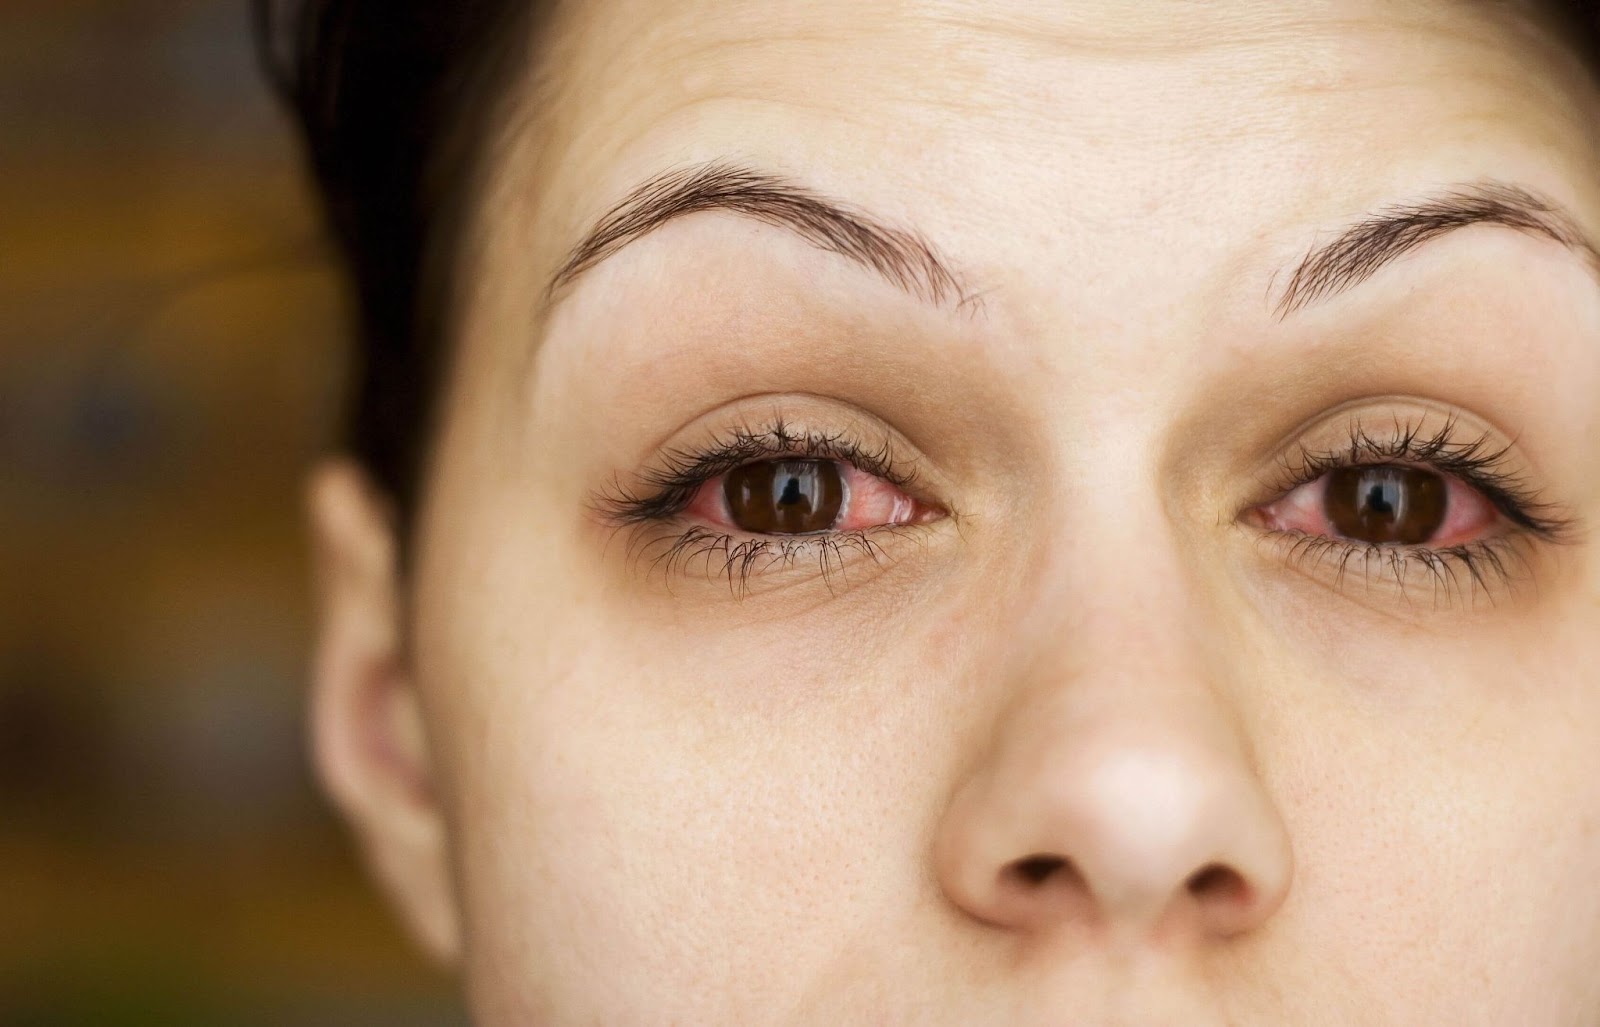 a woman with dry eyes in the morning, due to allergies